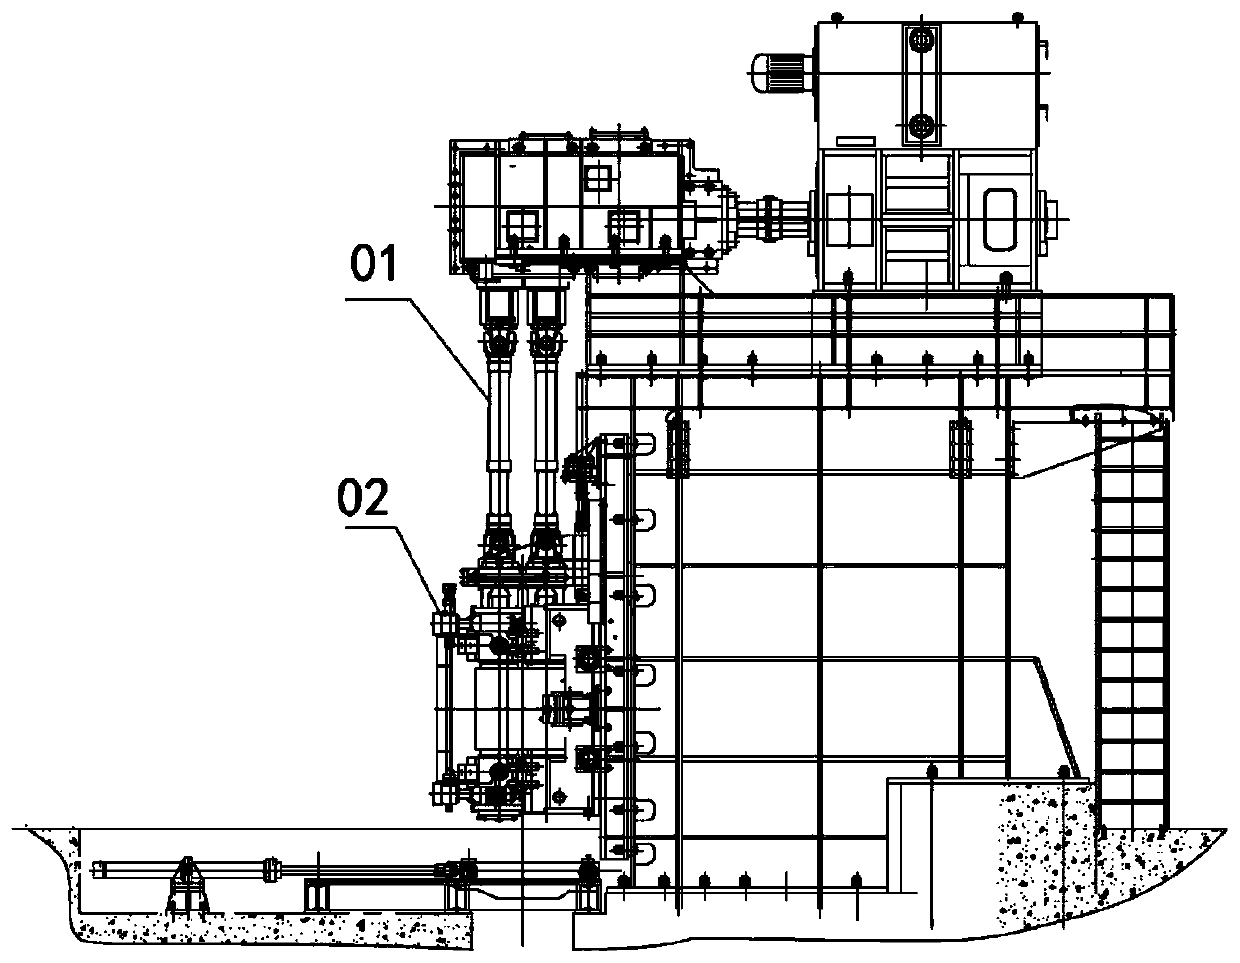 Auxiliary disassembly and assembly mechanism for cross universal spindle